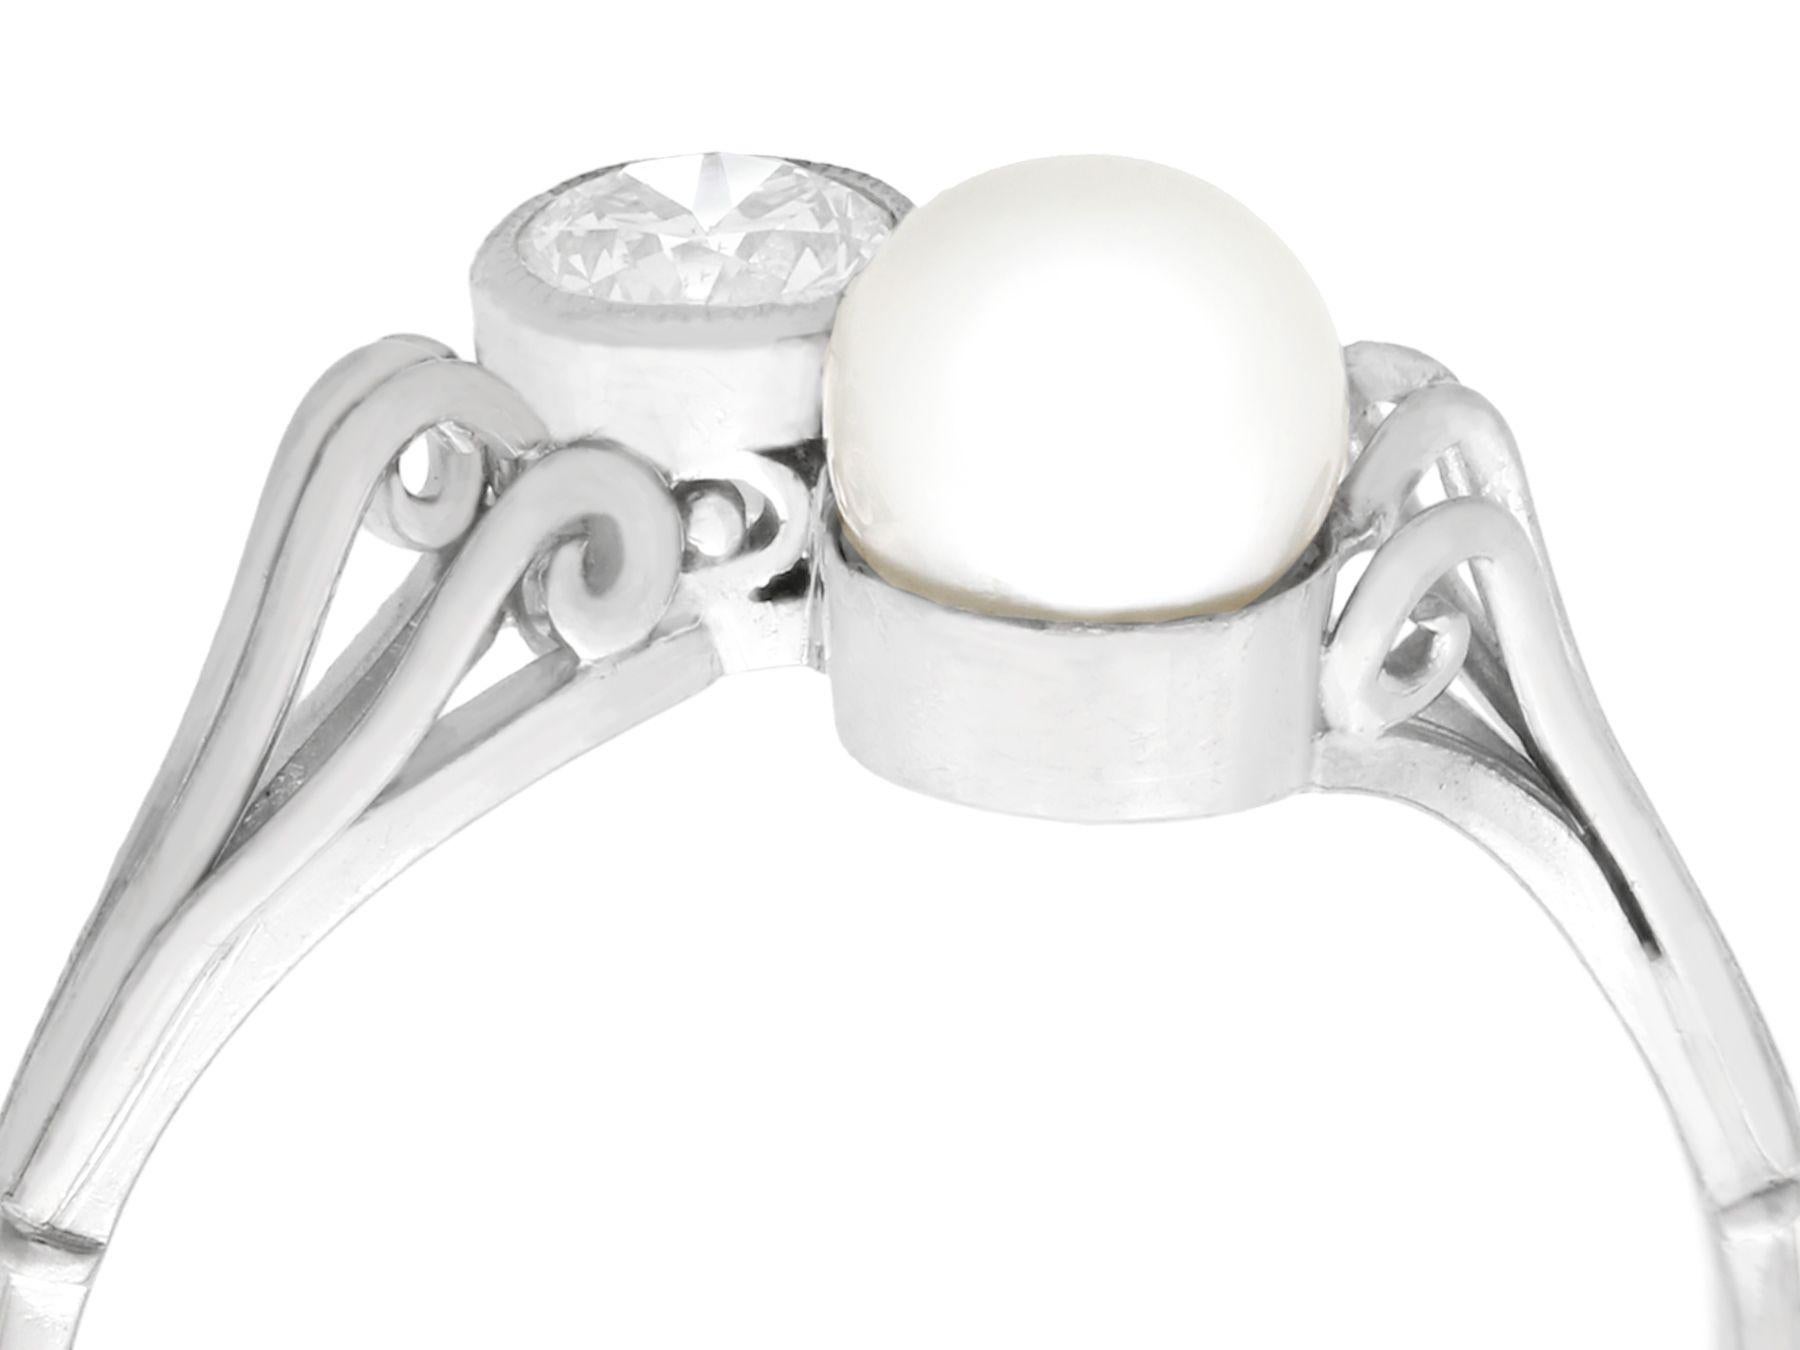 An impressive vintage 0.28 carat diamond and cultured pearl, 14 karat white gold twist style dress ring; part of our diverse pearl jewelry and estate jewelry collections.

This fine and impressive vintage pearl and diamond ring has been crafted in